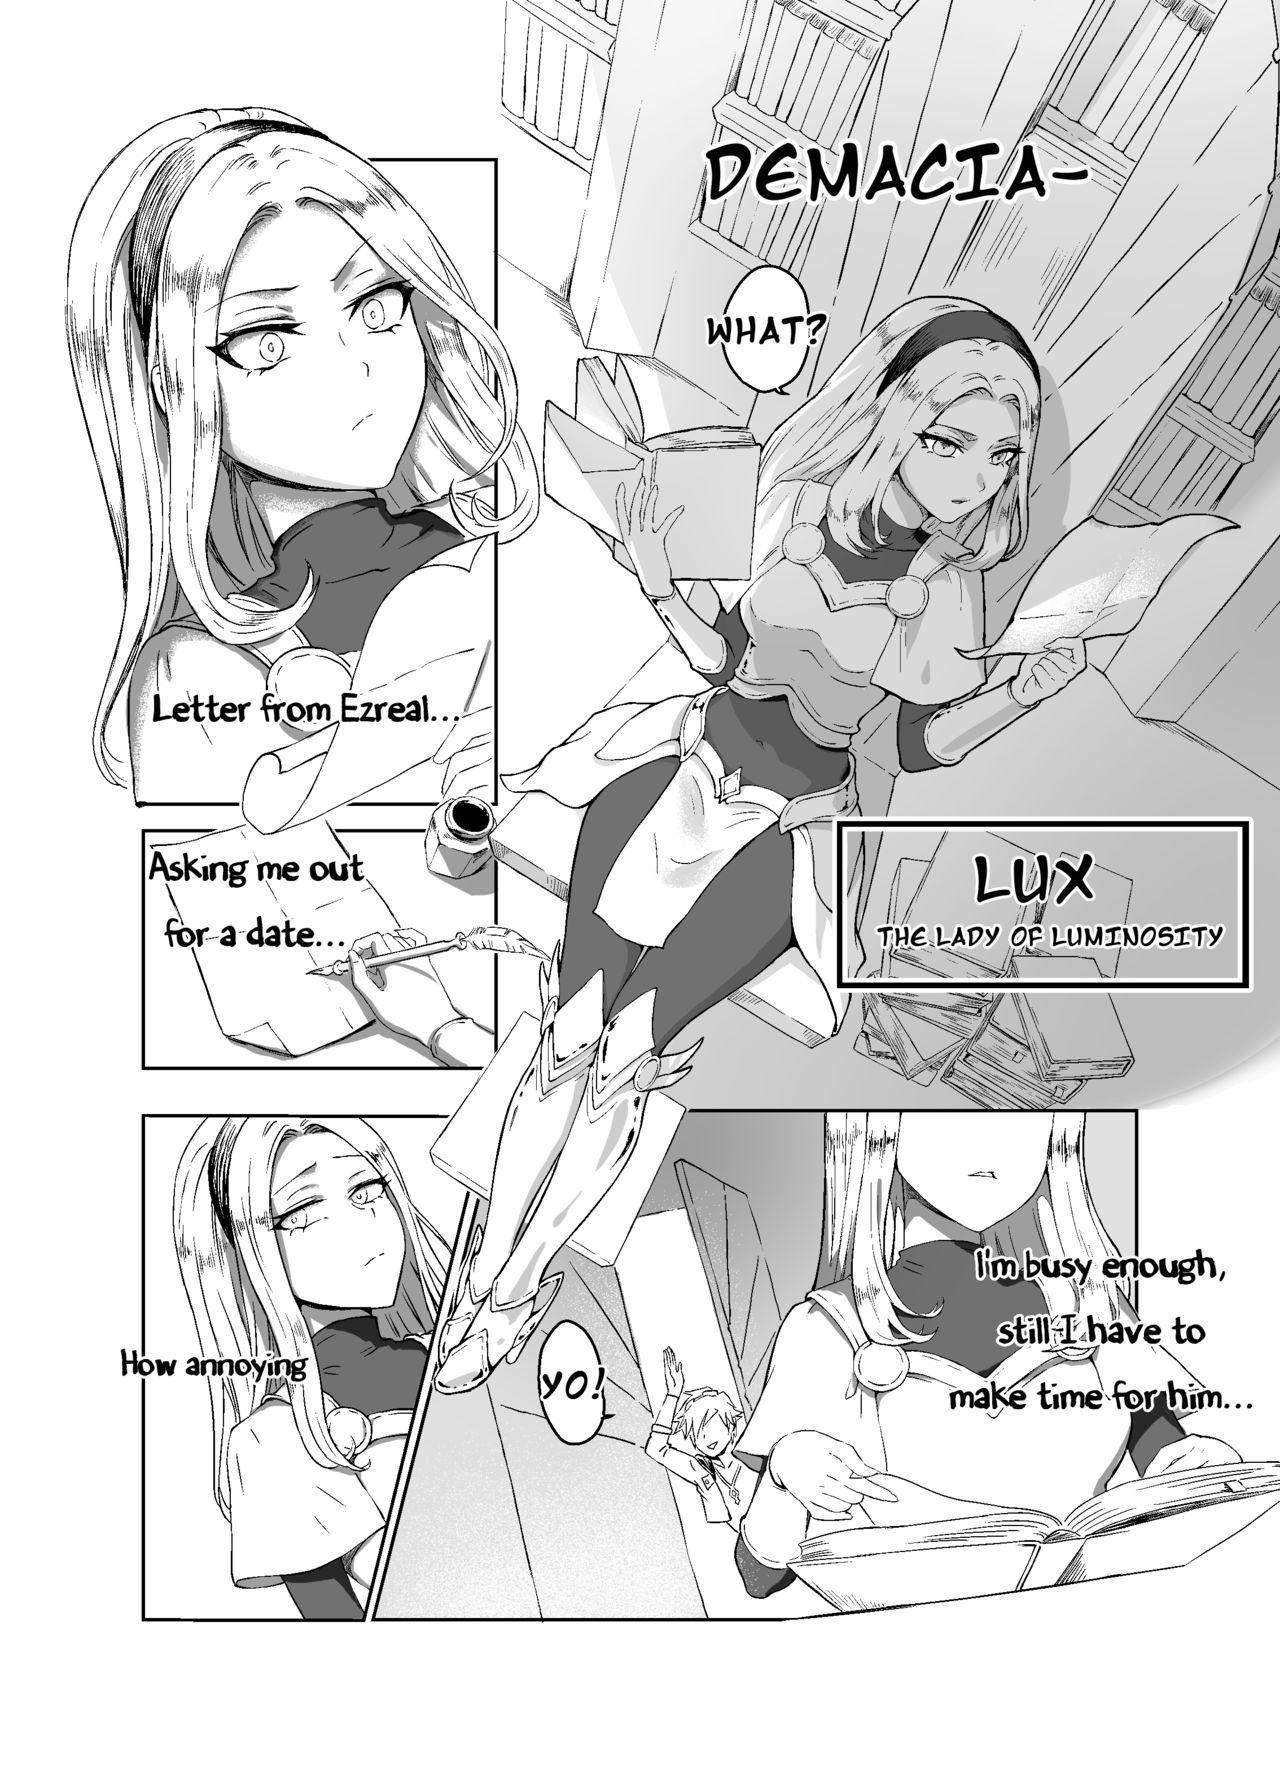 Exhib Lux x Viego ft. Ezreal - League of legends Panocha - Page 2